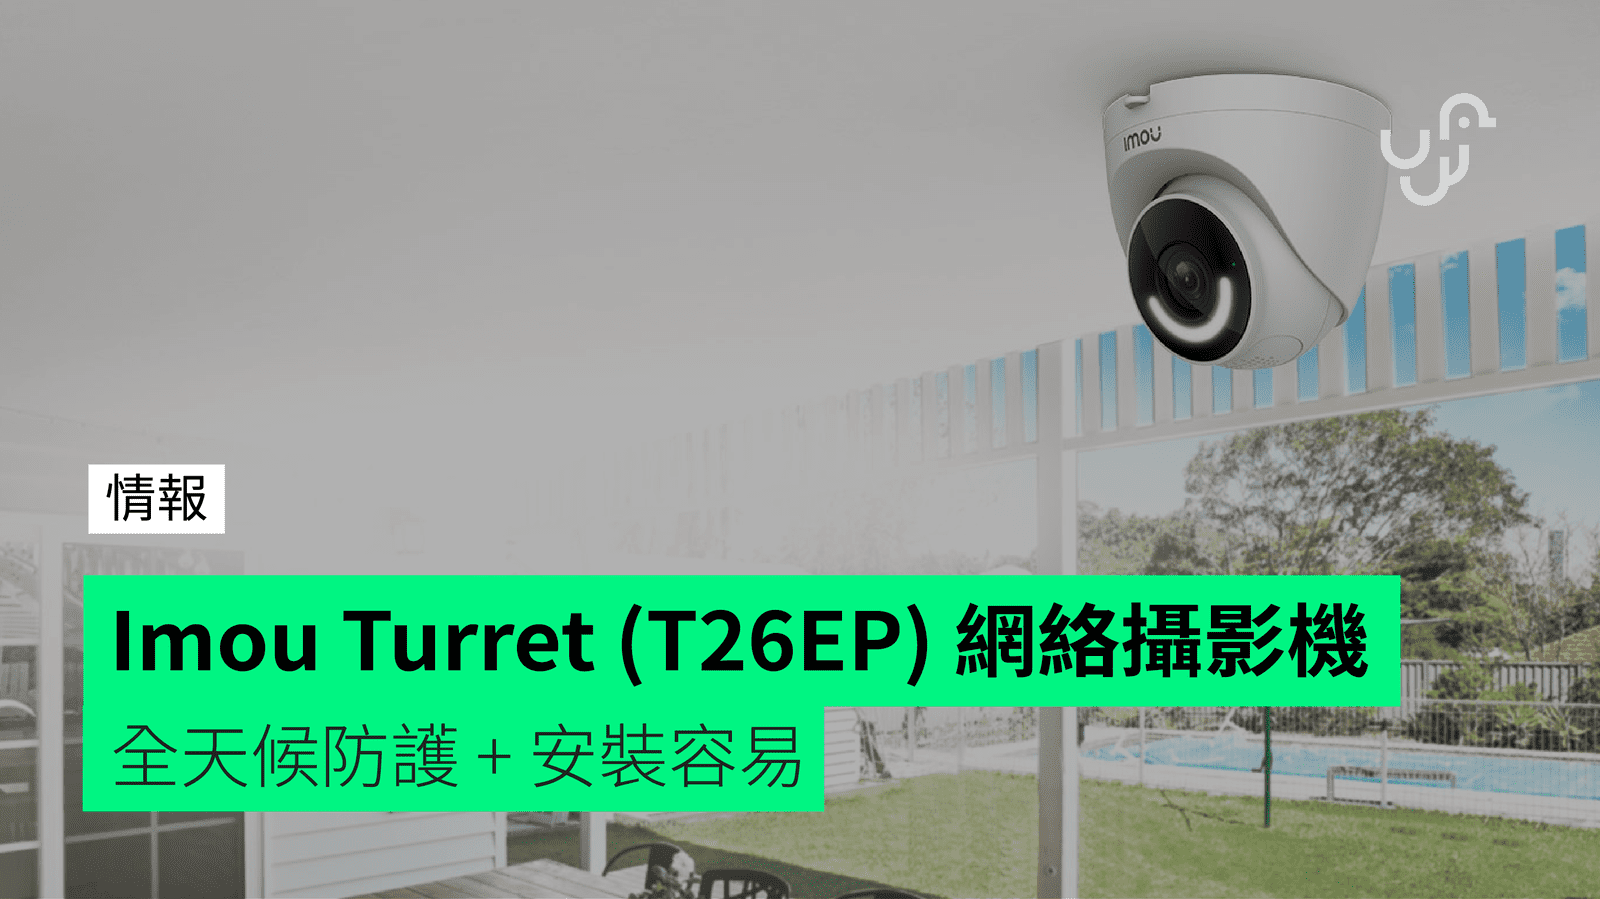 Imou Turret (T26EP) All-Weather Protection IP Camera + Easy Installation